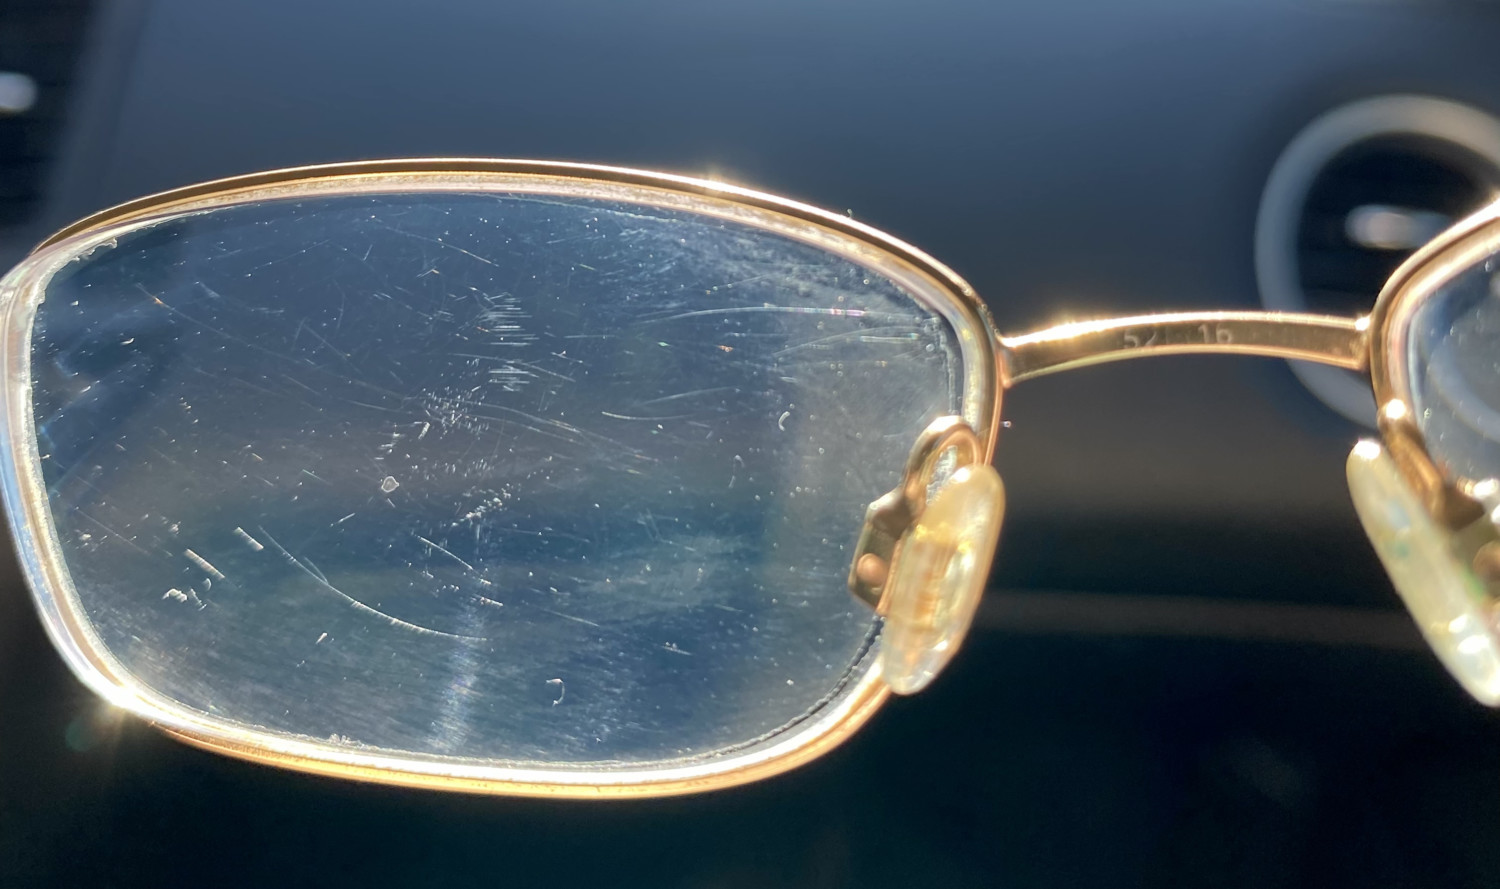 How to get rid of scratches on glasses